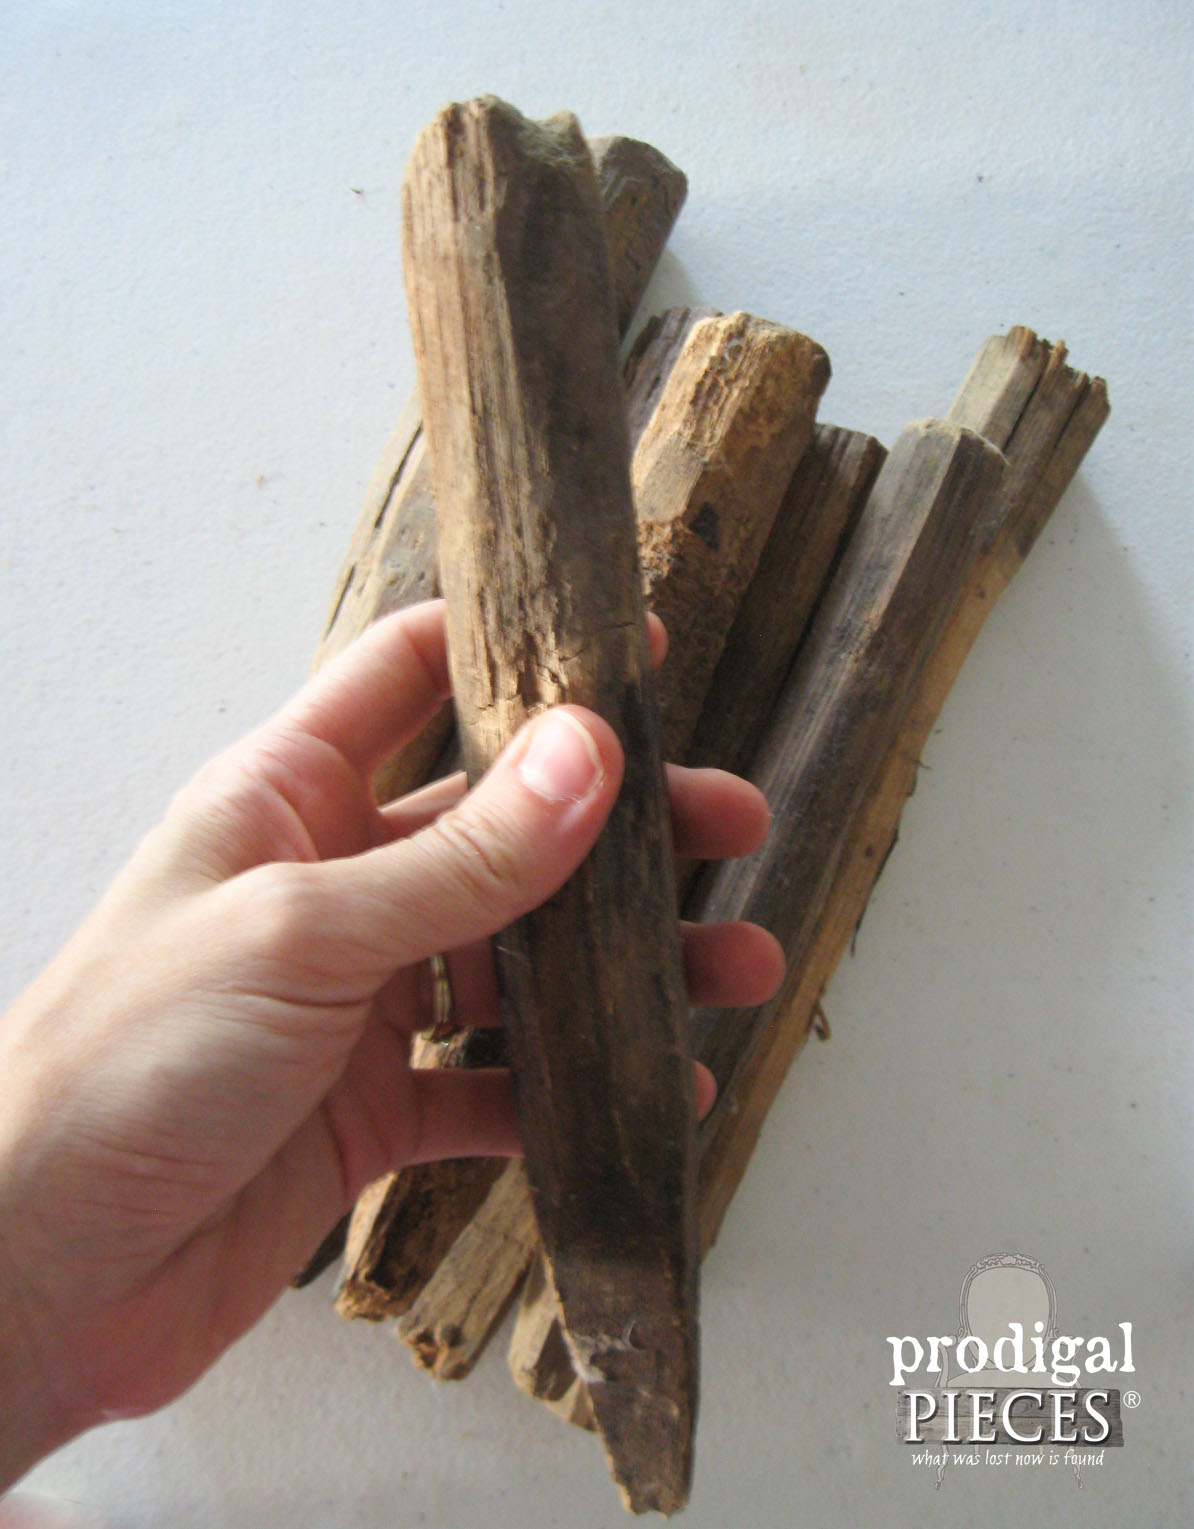 Collection of Antique Barn Beam Pegs | Prodigal Pieces | www.prodigalpieces.com